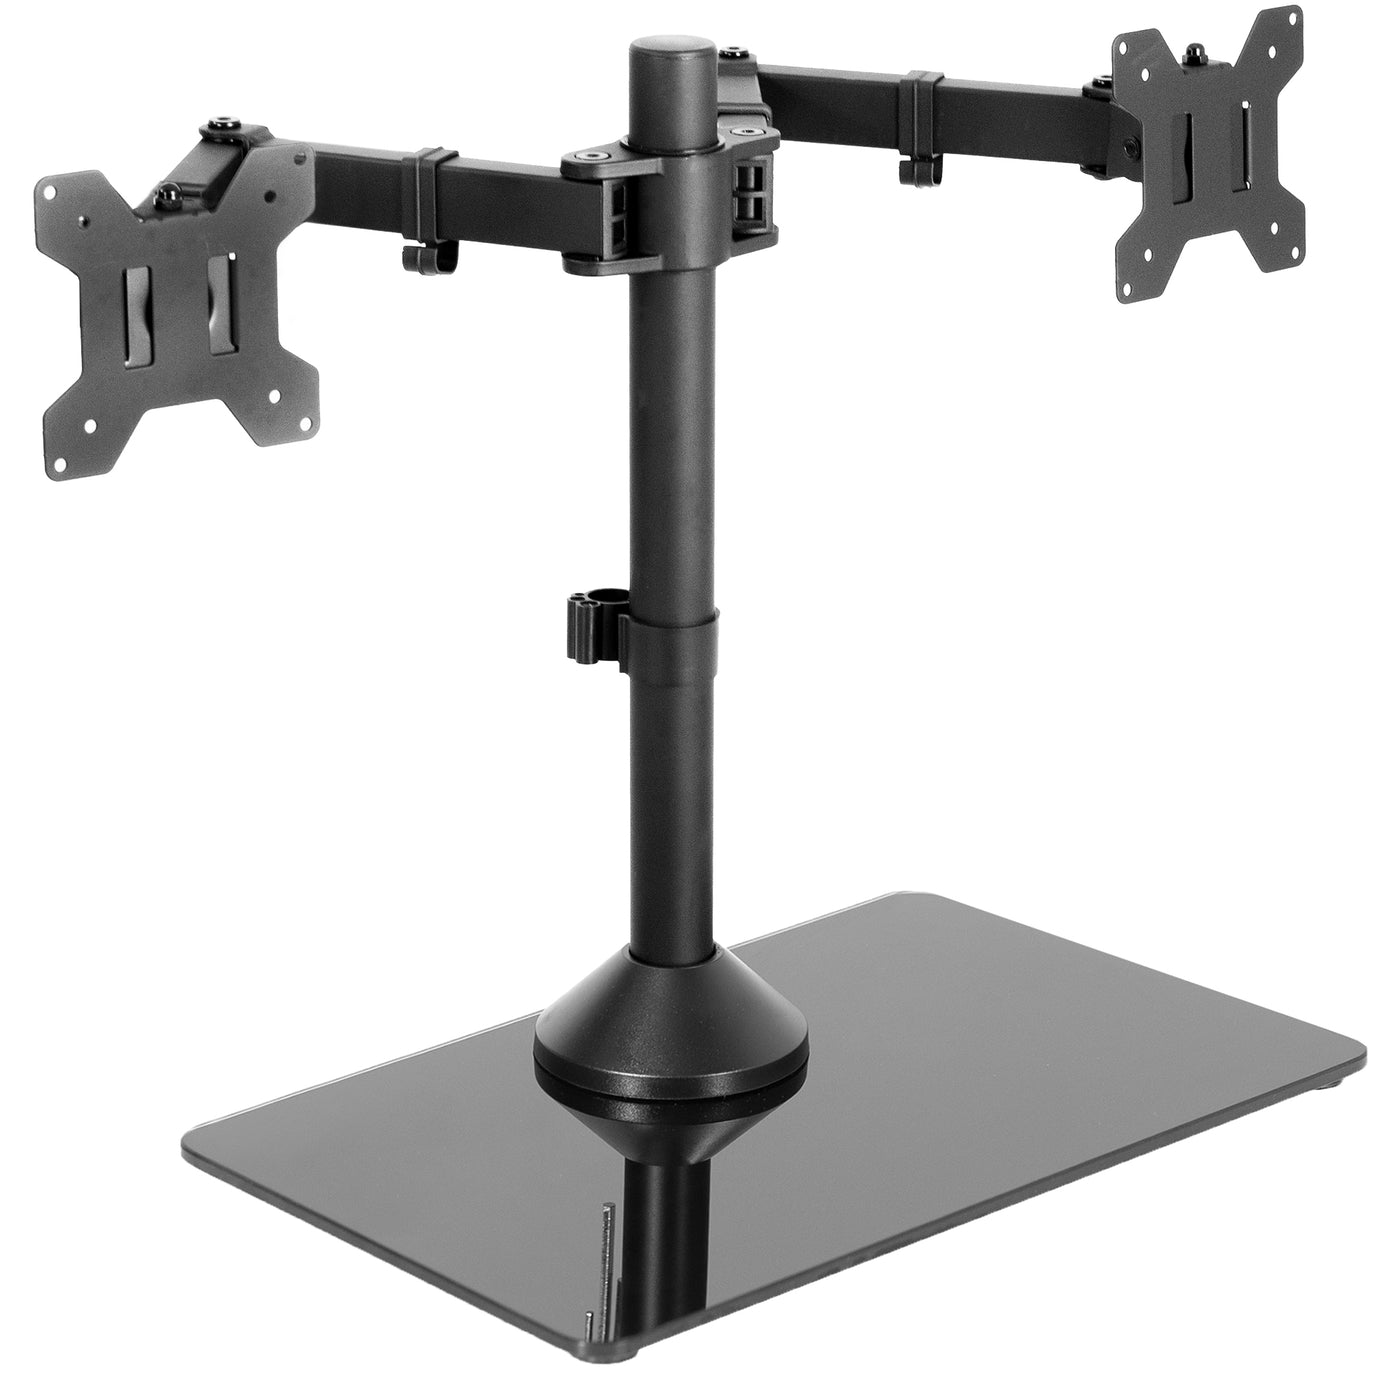 Enhance your work day with this high-grade steel stand built for scratch resistance and security. Designed with user-geared features such as arm articulation, removable VESA mounting plates, adjustable monitor height, integrated cable management, and more, this mount is customizable to your particular office needs.